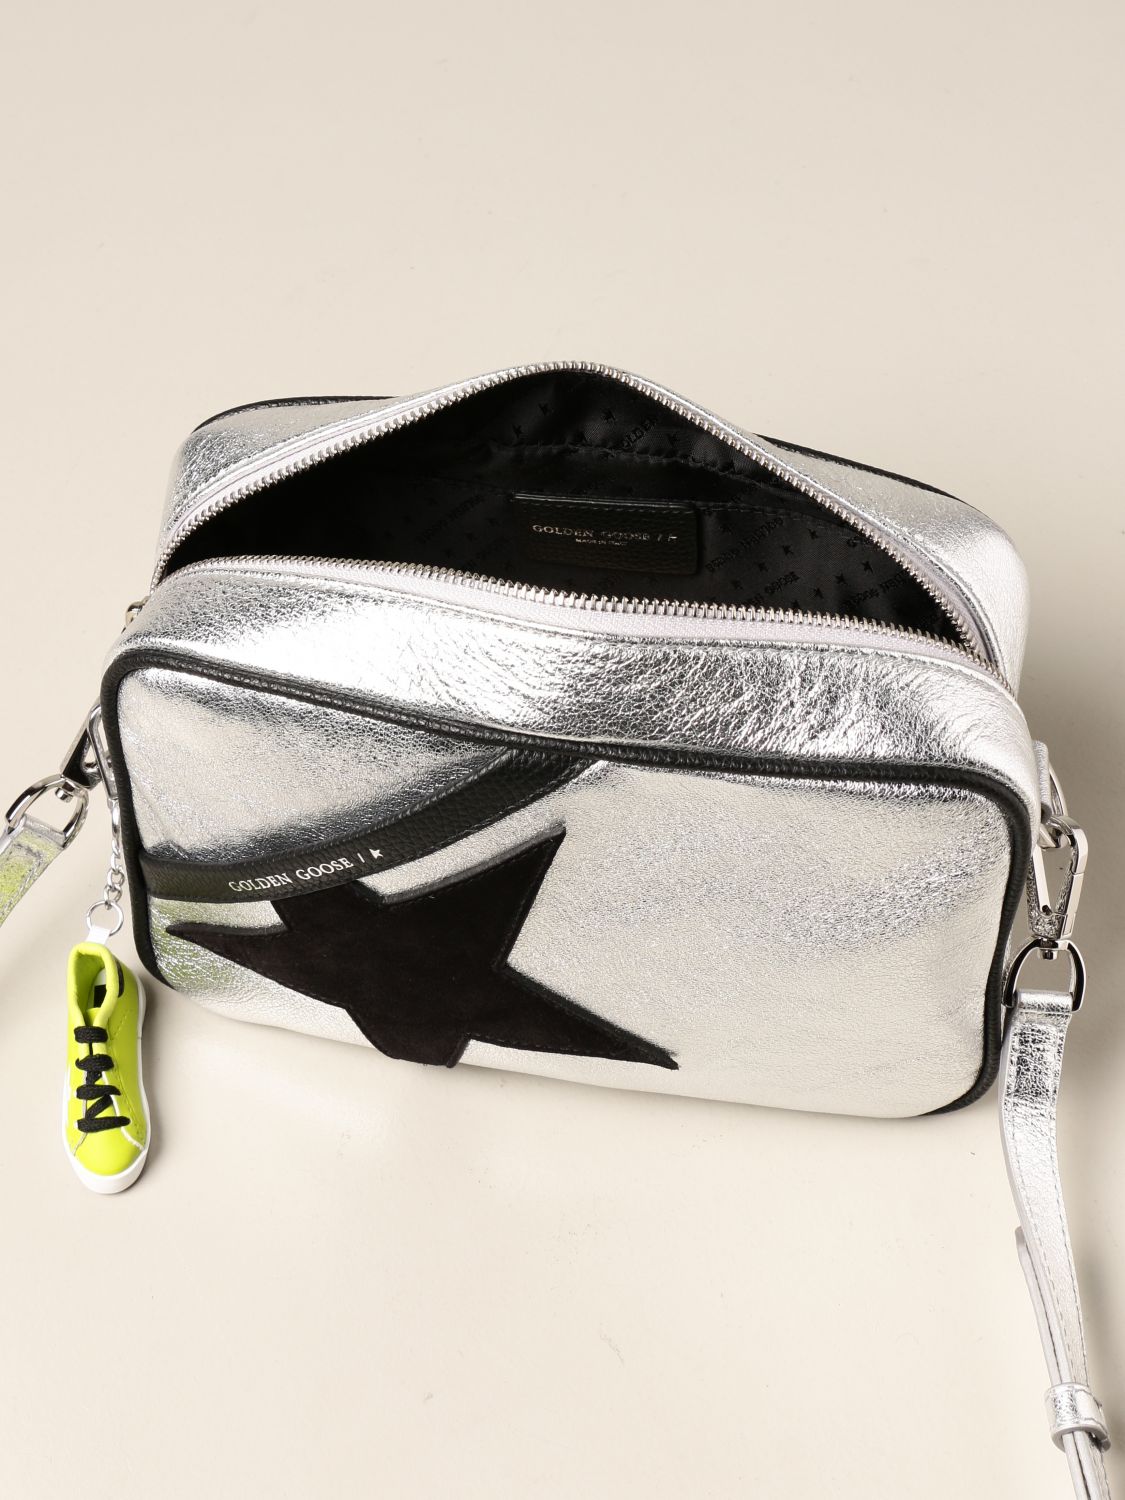 GOLDEN GOOSE: Star bag in laminated leather | Crossbody Bags Golden Goose Women Silver | Crossbody Bags Golden GWA00101.A000212.60246 GIGLIO.COM